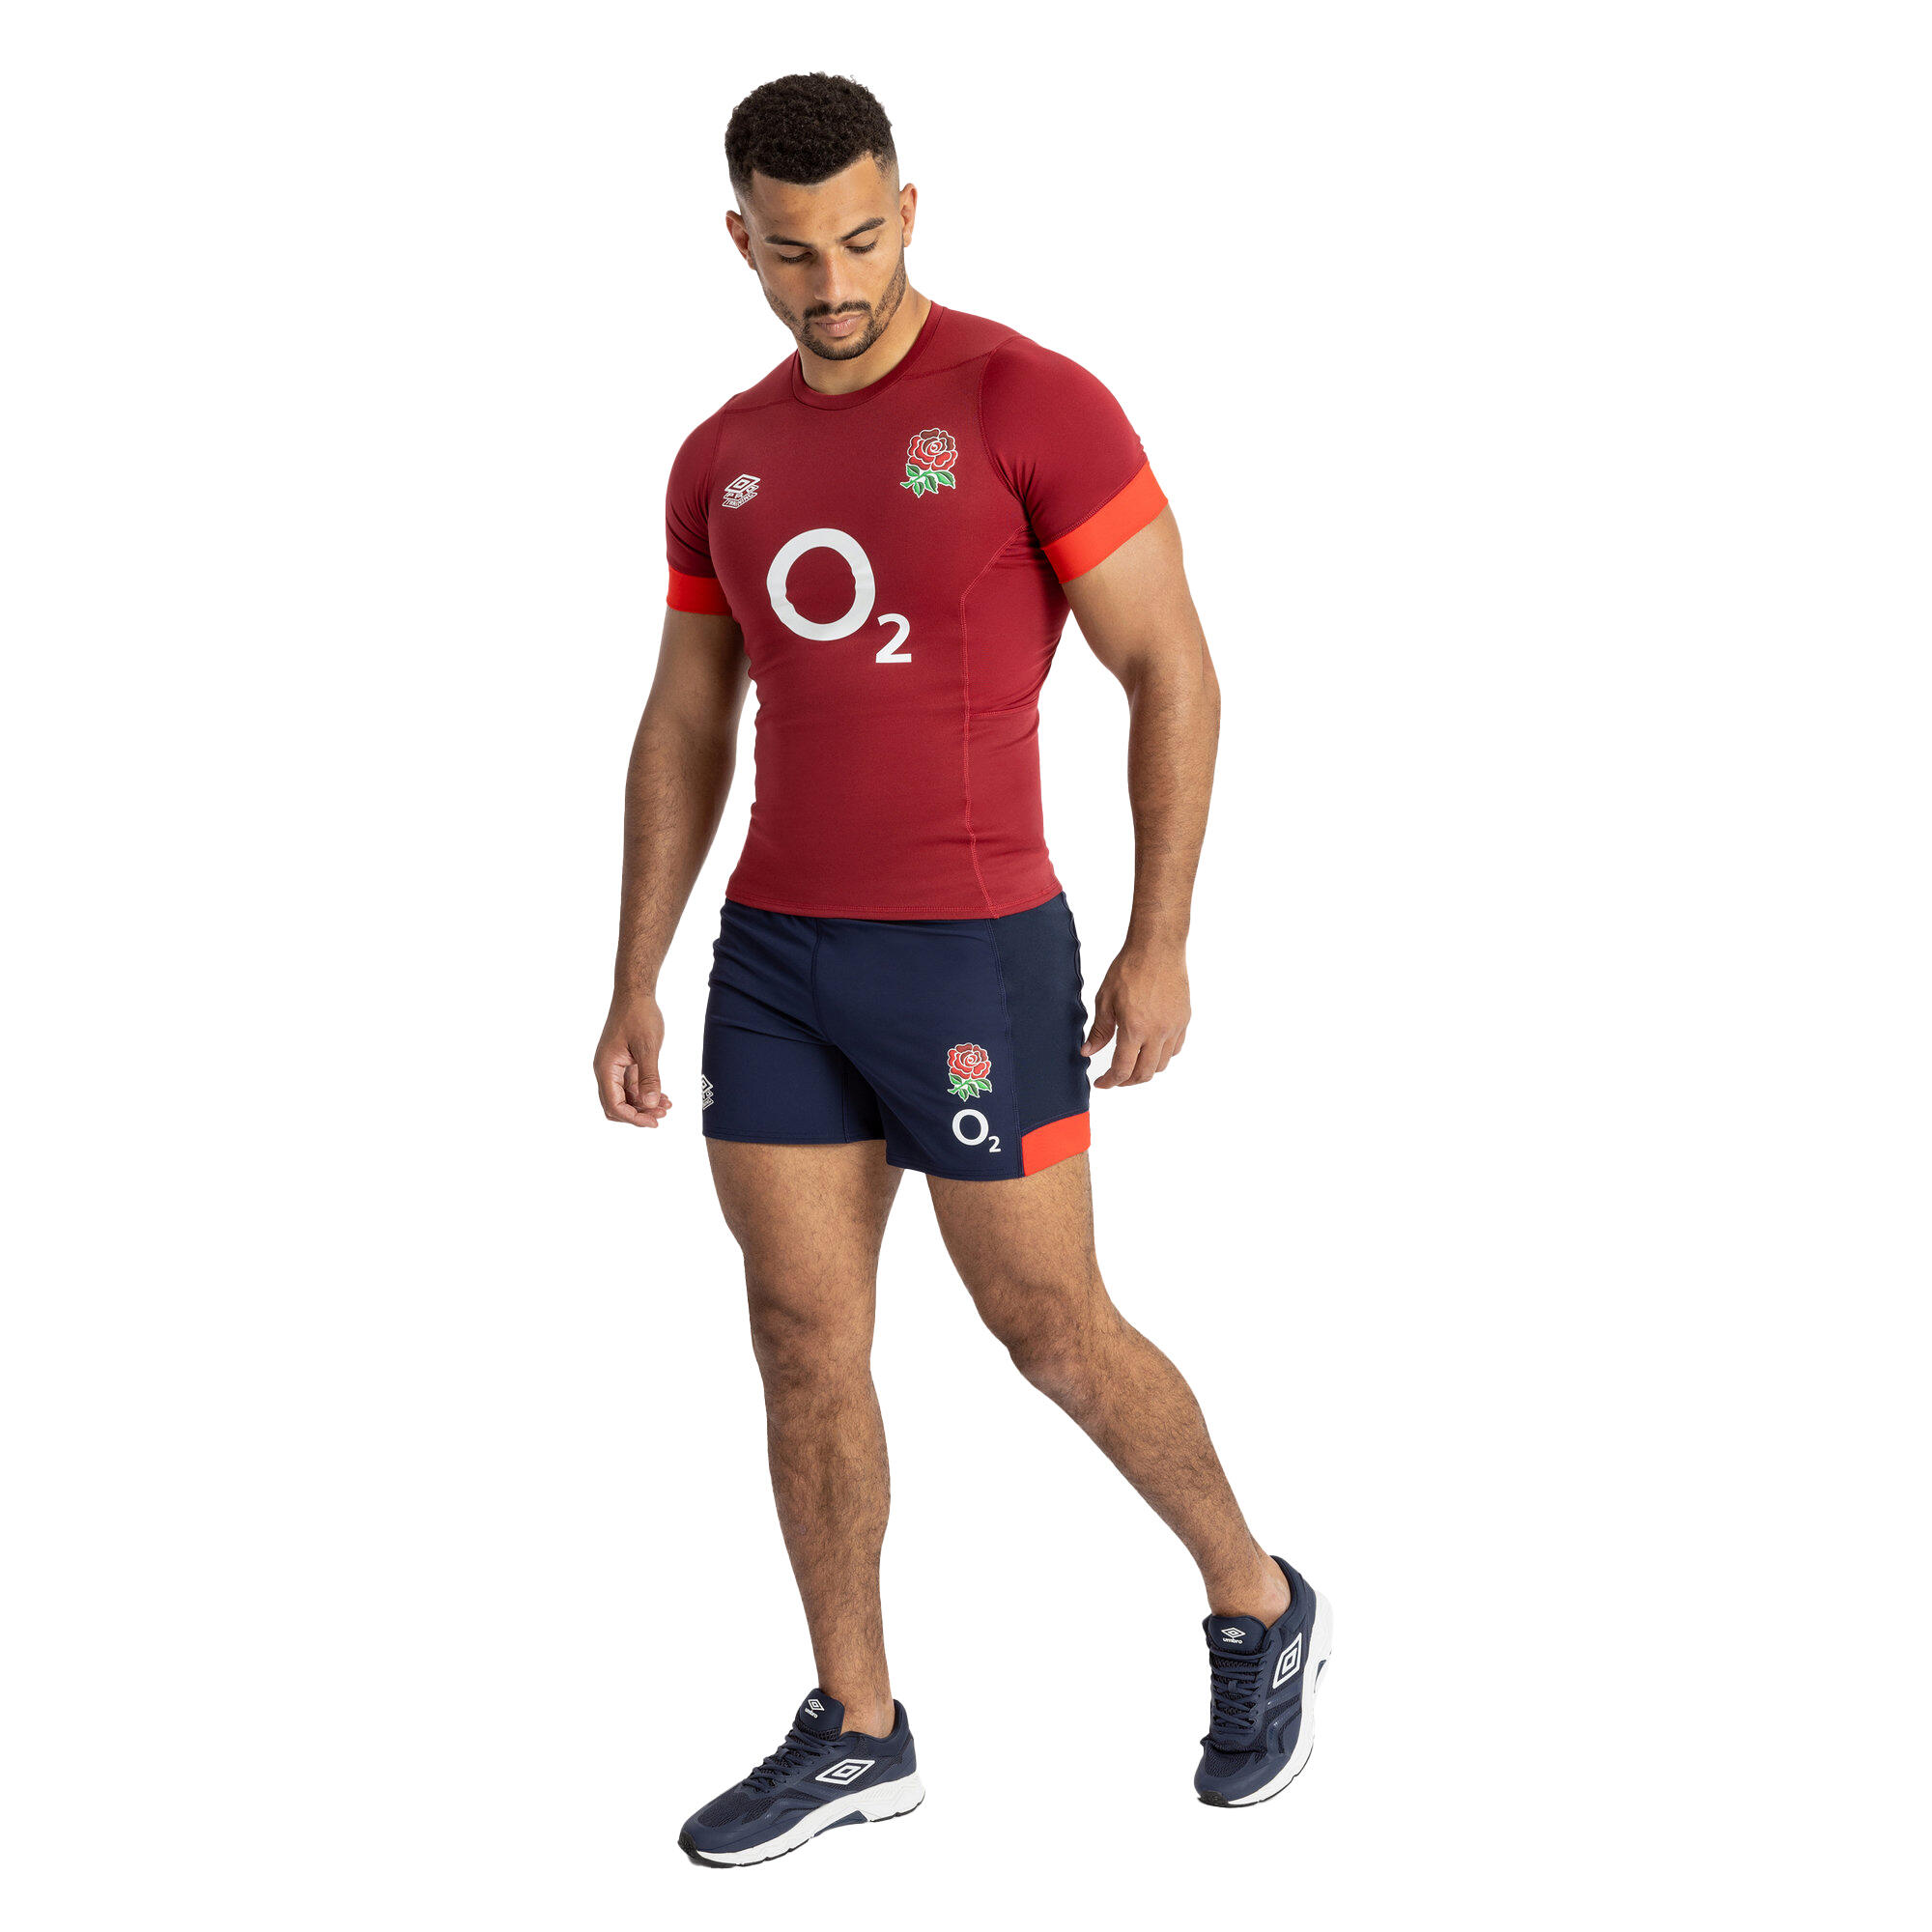 Mens 23/24 England Rugby Training Shorts (Navy Blazer/Flame Scarlet) 4/4